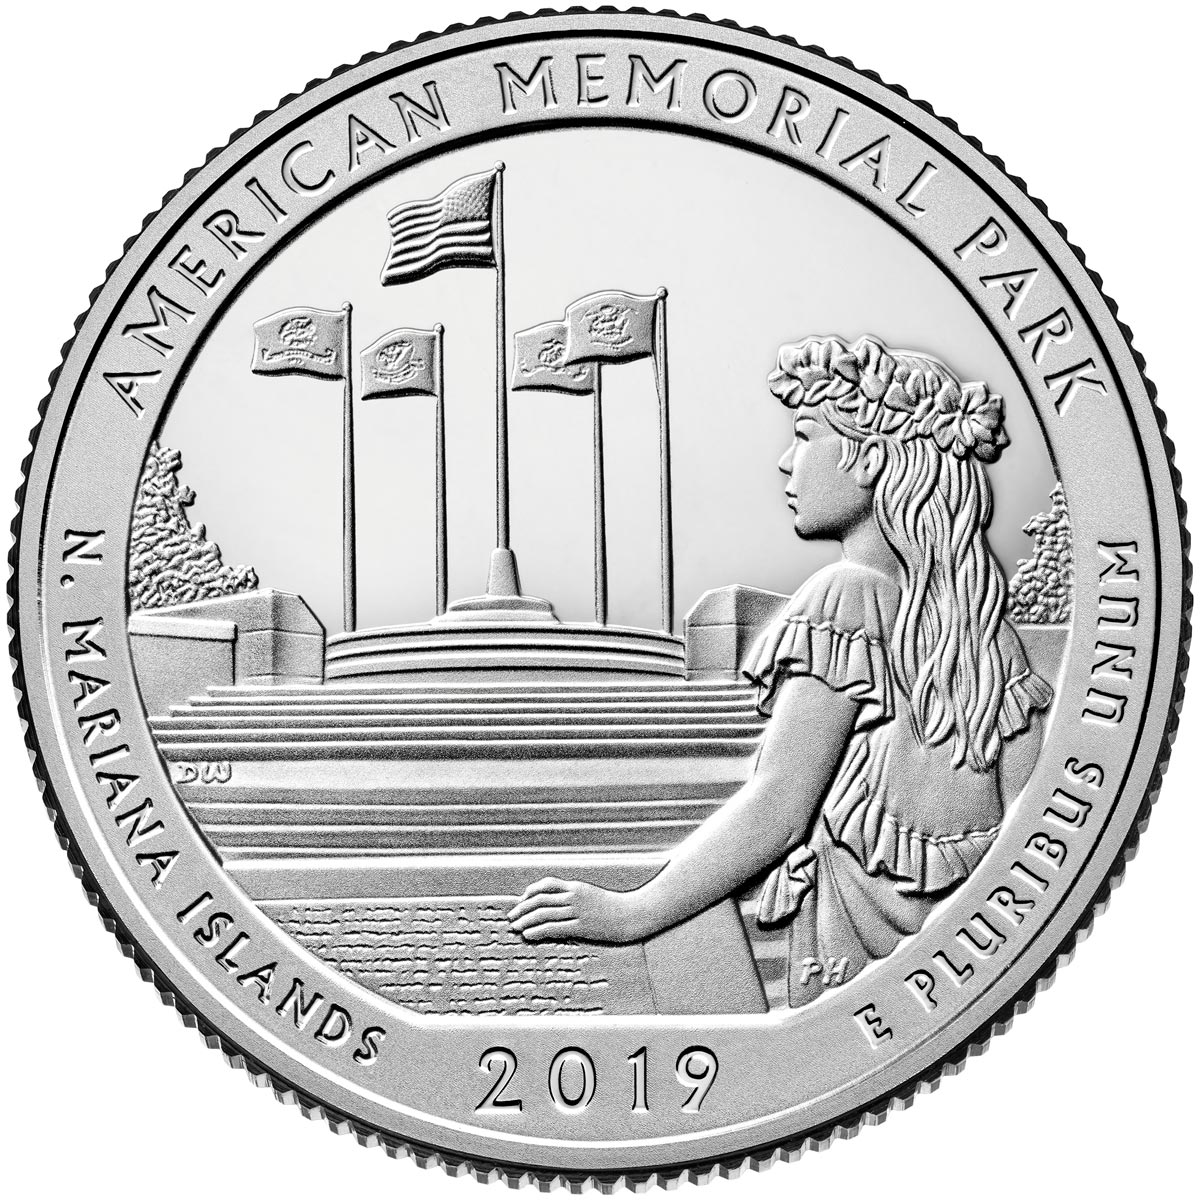 Image of 25 cents coin - American Memorial Park | USA 2019.  The Copper–Nickel (CuNi) coin is of Proof, BU, UNC quality.